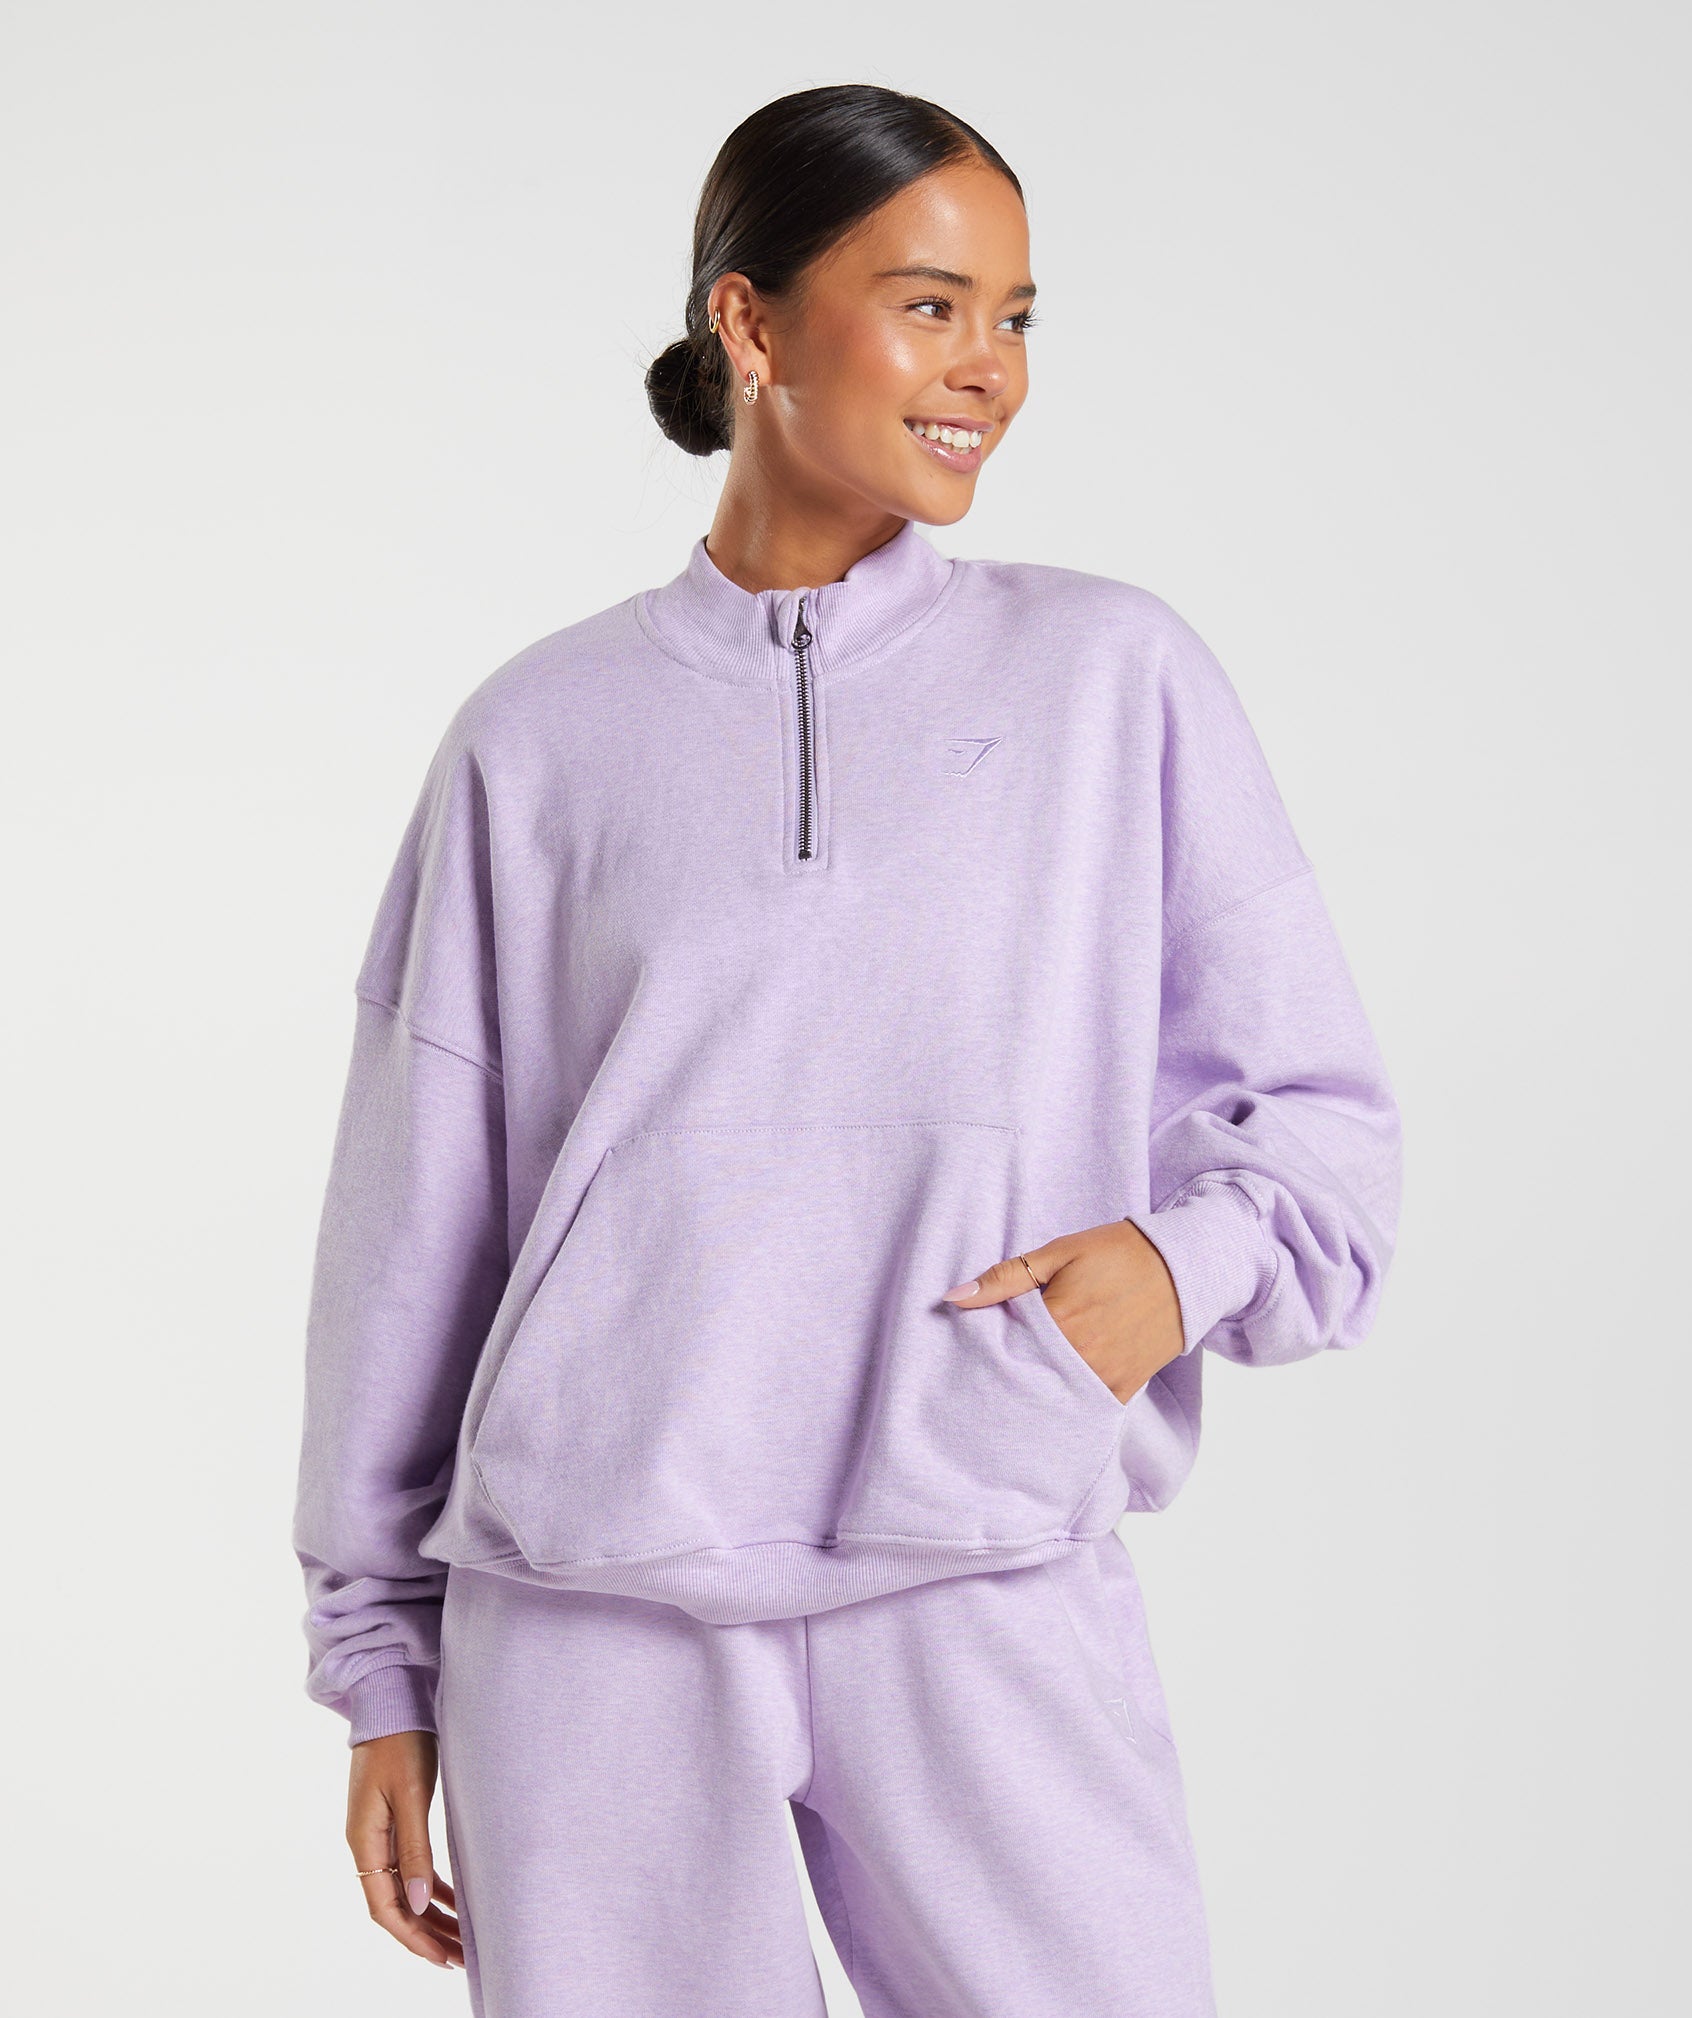 Rest Day Sweats 1/2 Zip Pullover in Aura Lilac Marl - view 2